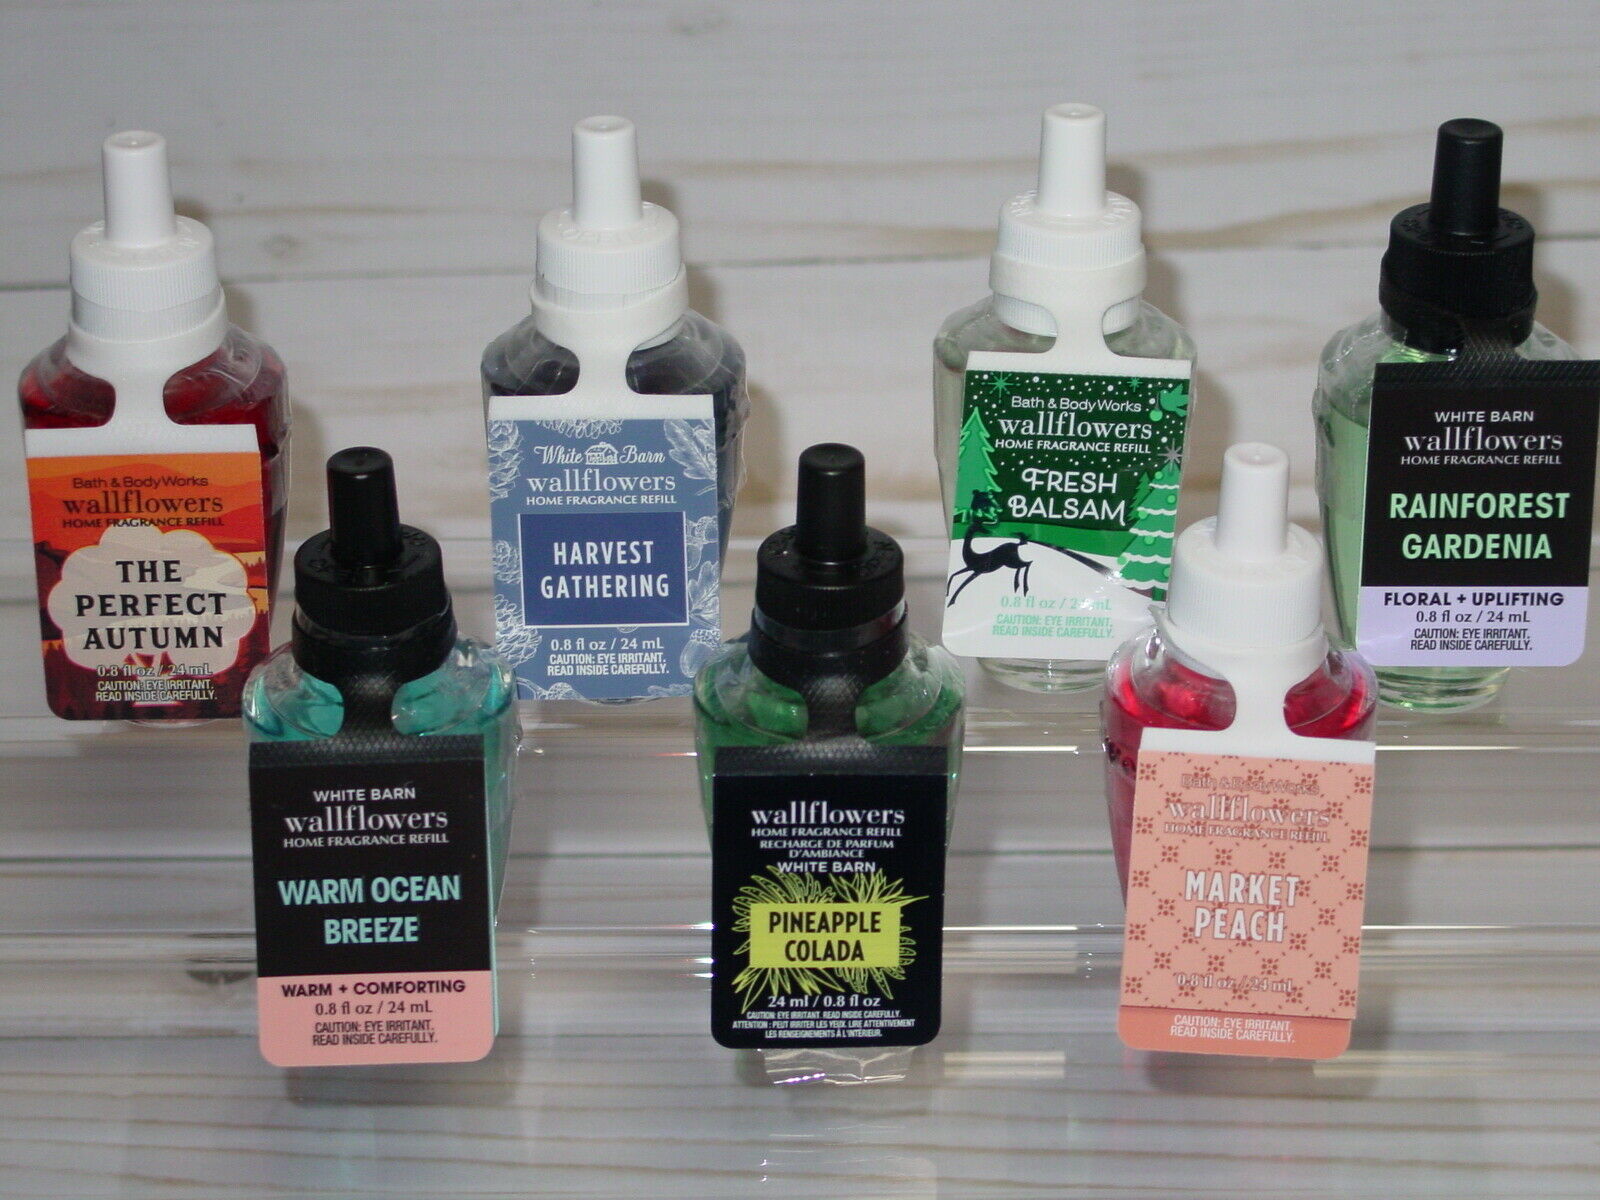 BATH & BODY WORKS WALLFLOWERS HOME FRAGRANCE REFILL *SINGLE OR TWO PACK* CHOOSE